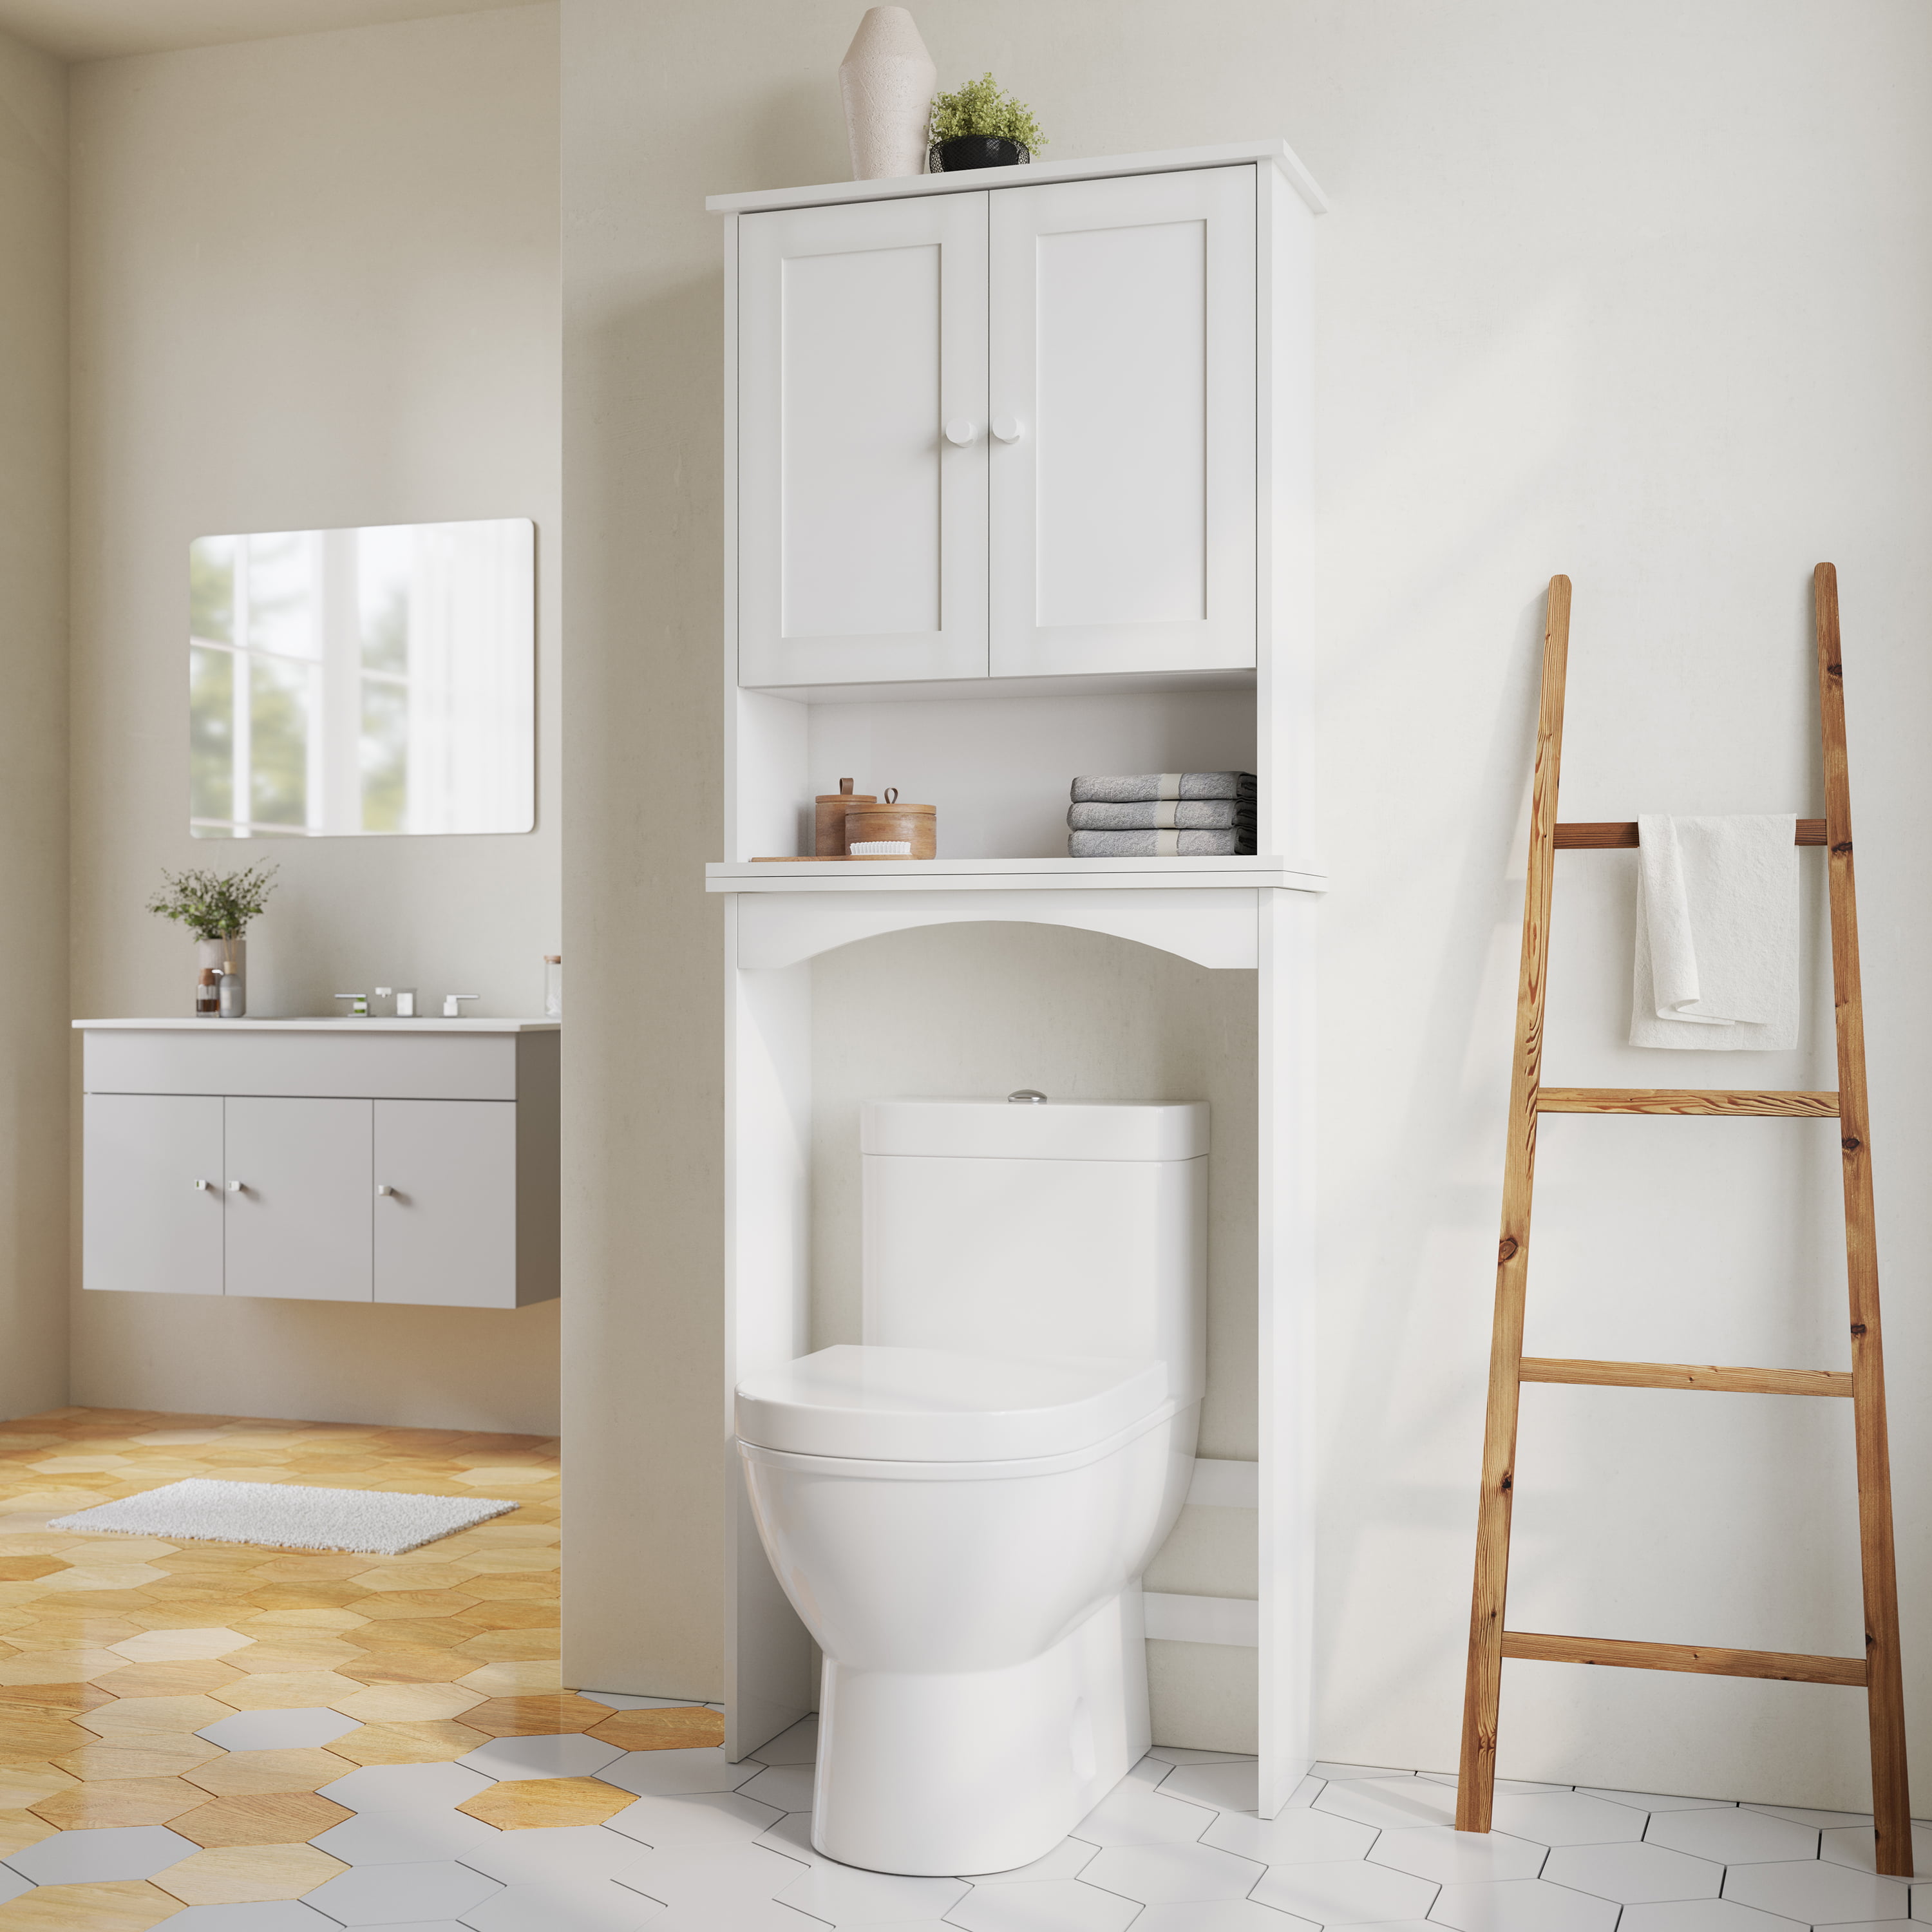 The Toilet Bathroom Cabinet Organizer, Bathroom Shelves Over Toilet Bed Bath And Beyond